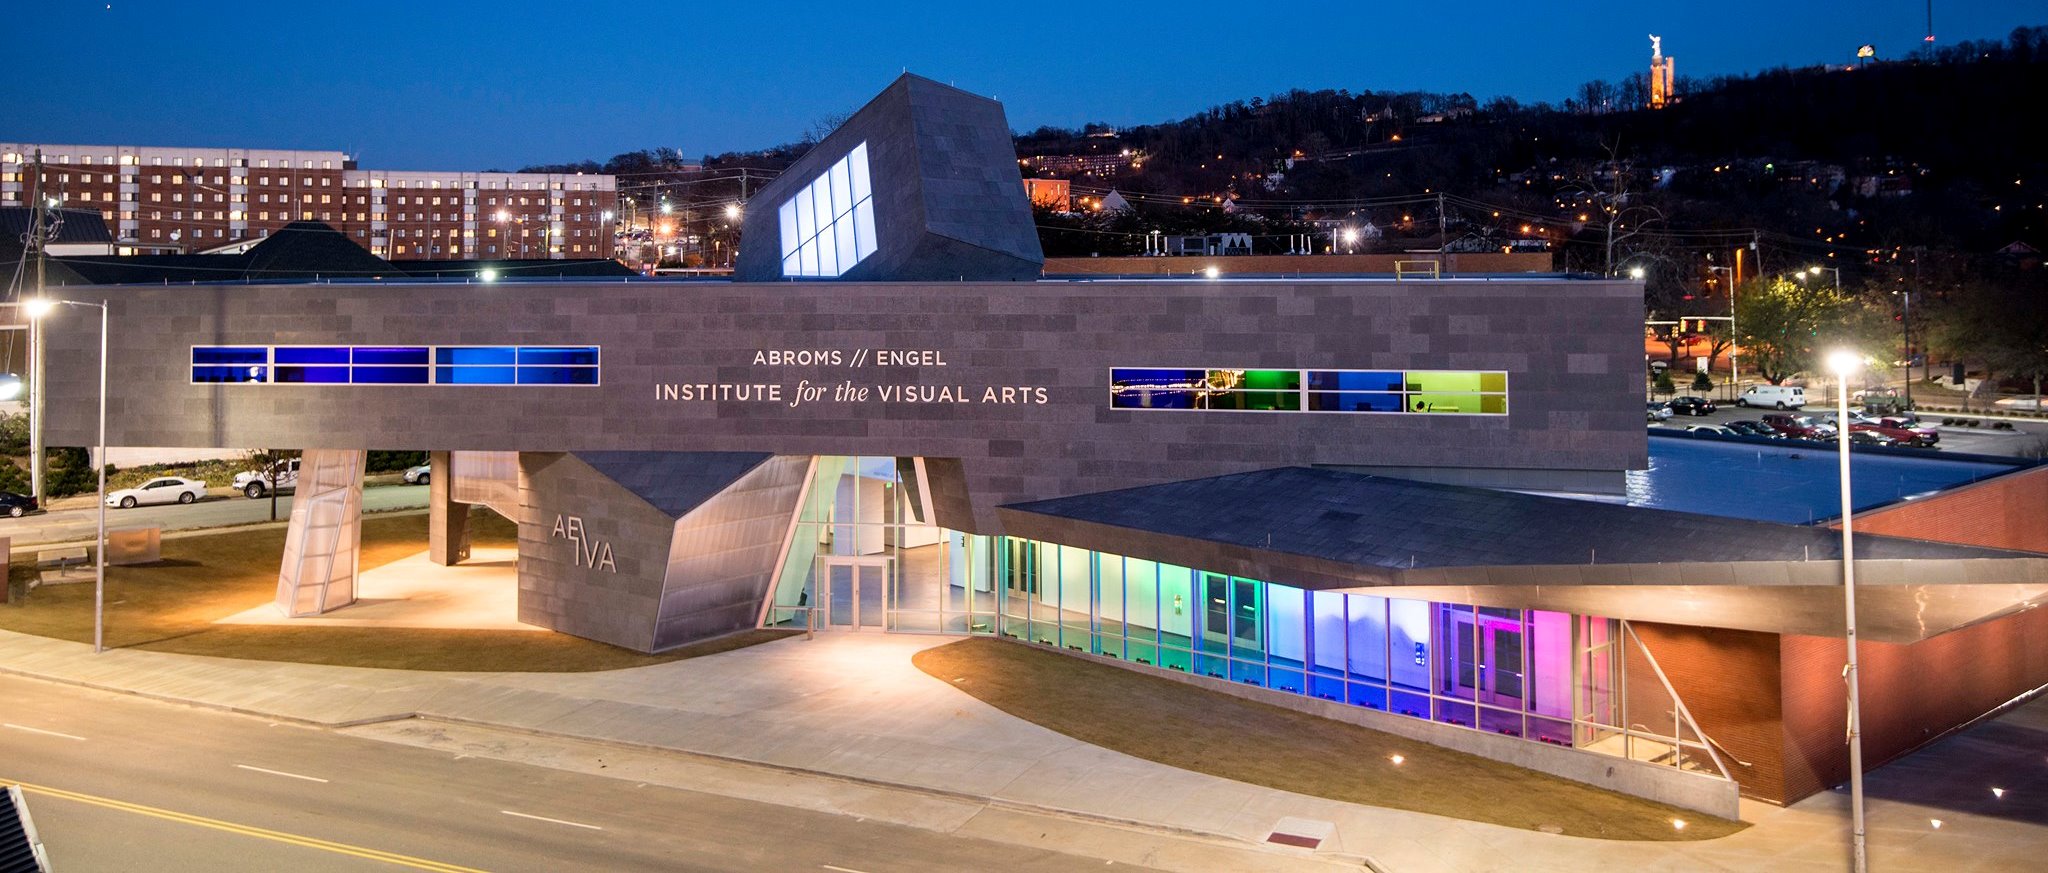 The Abroms-Engel Institute for Visual Arts